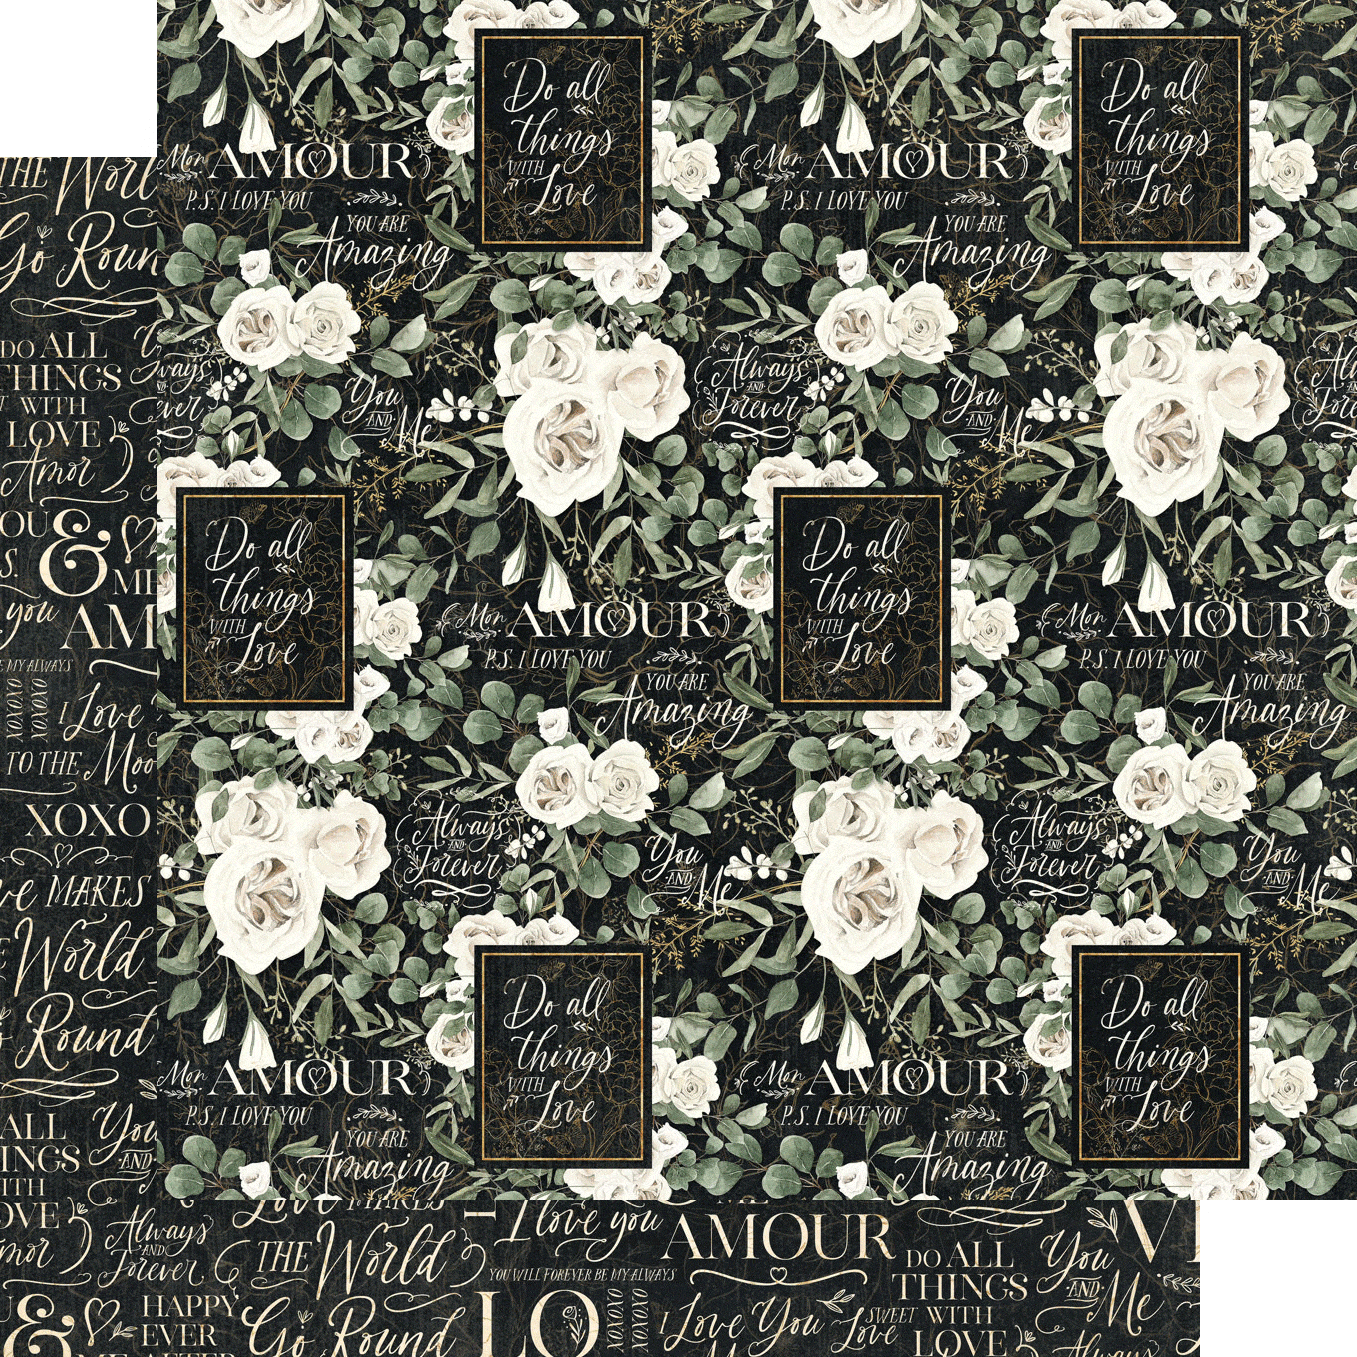 P.S. I Love You Collection Always and Forever 12 x 12 Double-Sided Scrapbook Paper by Graphic 45 - Scrapbook Supply Companies